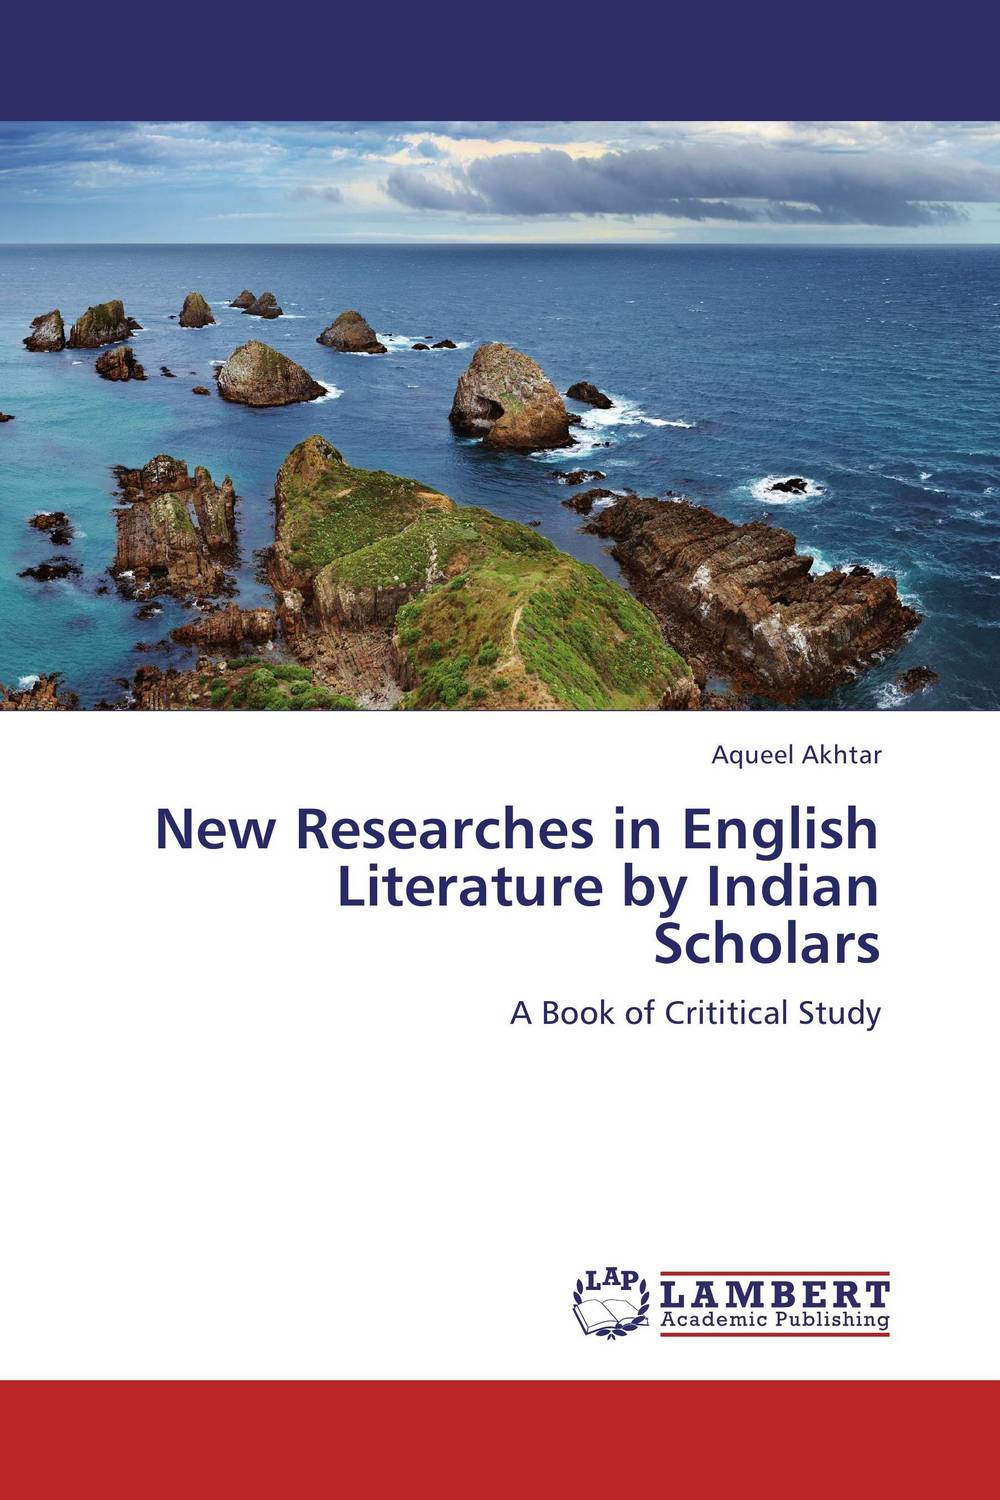 New Researches in English Literature by Indian Scholars